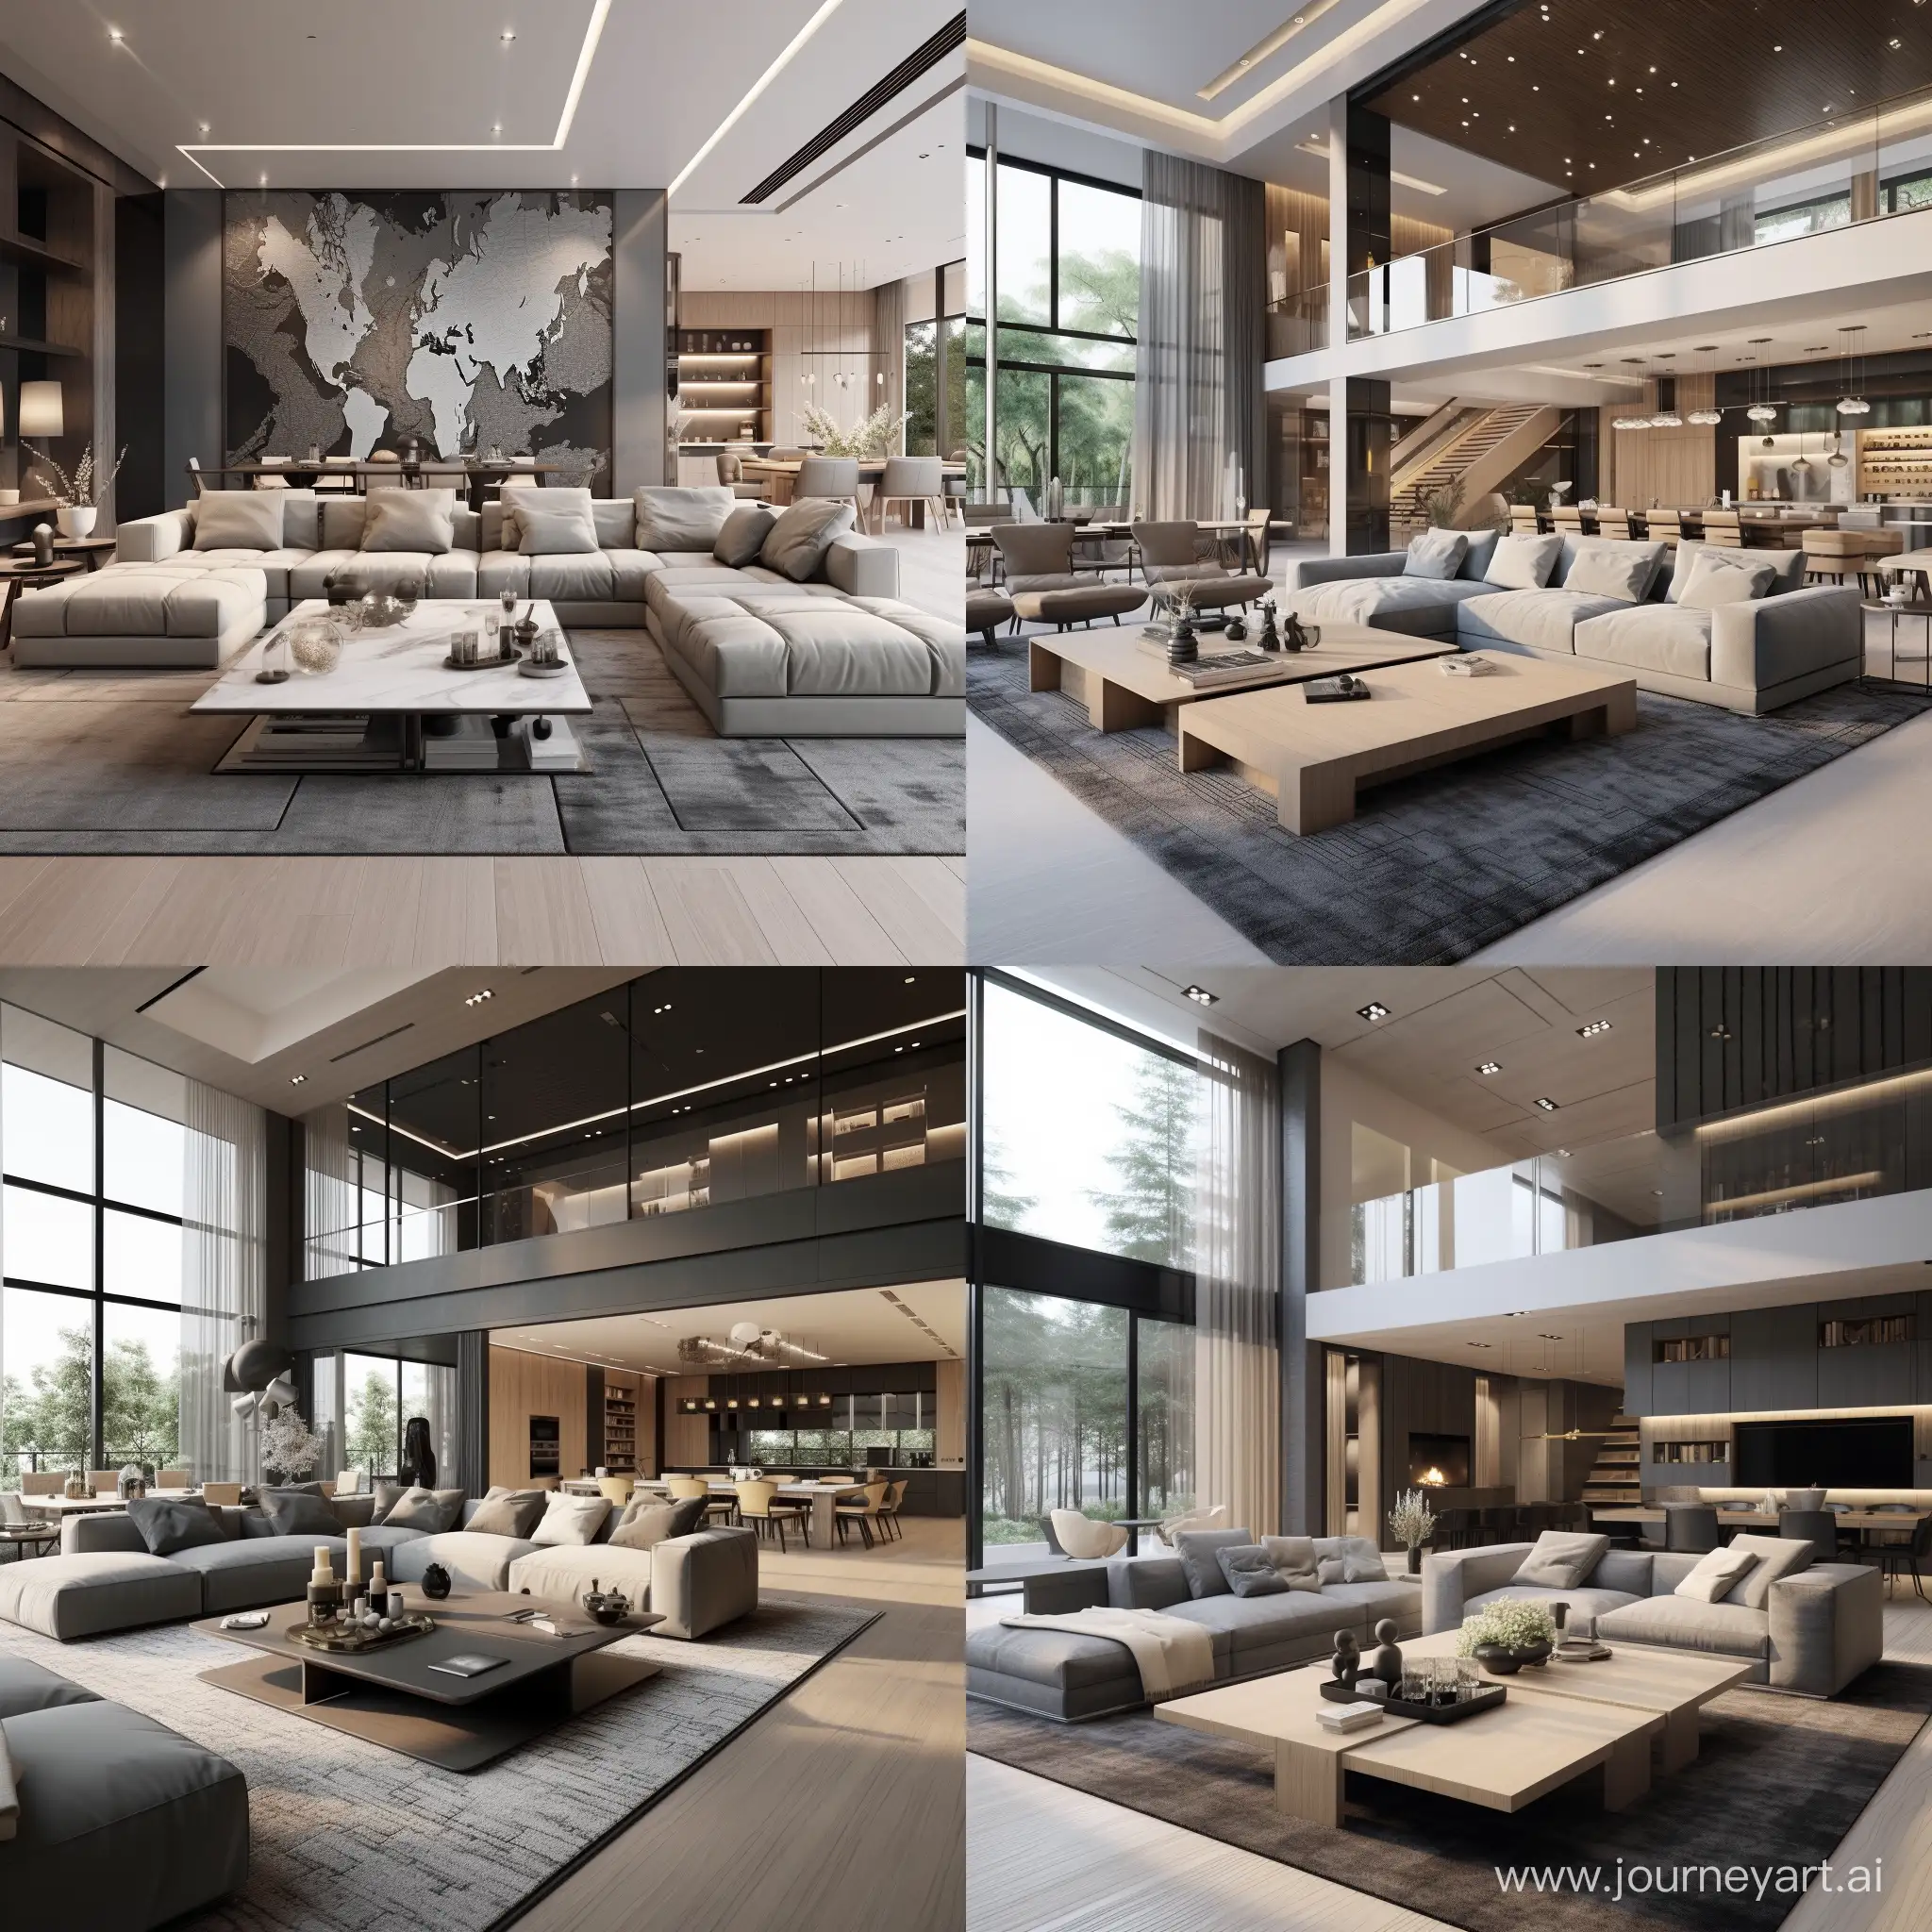 Spacious-Modern-Home-Interior-with-Elegant-Gray-and-Milky-Furnishings